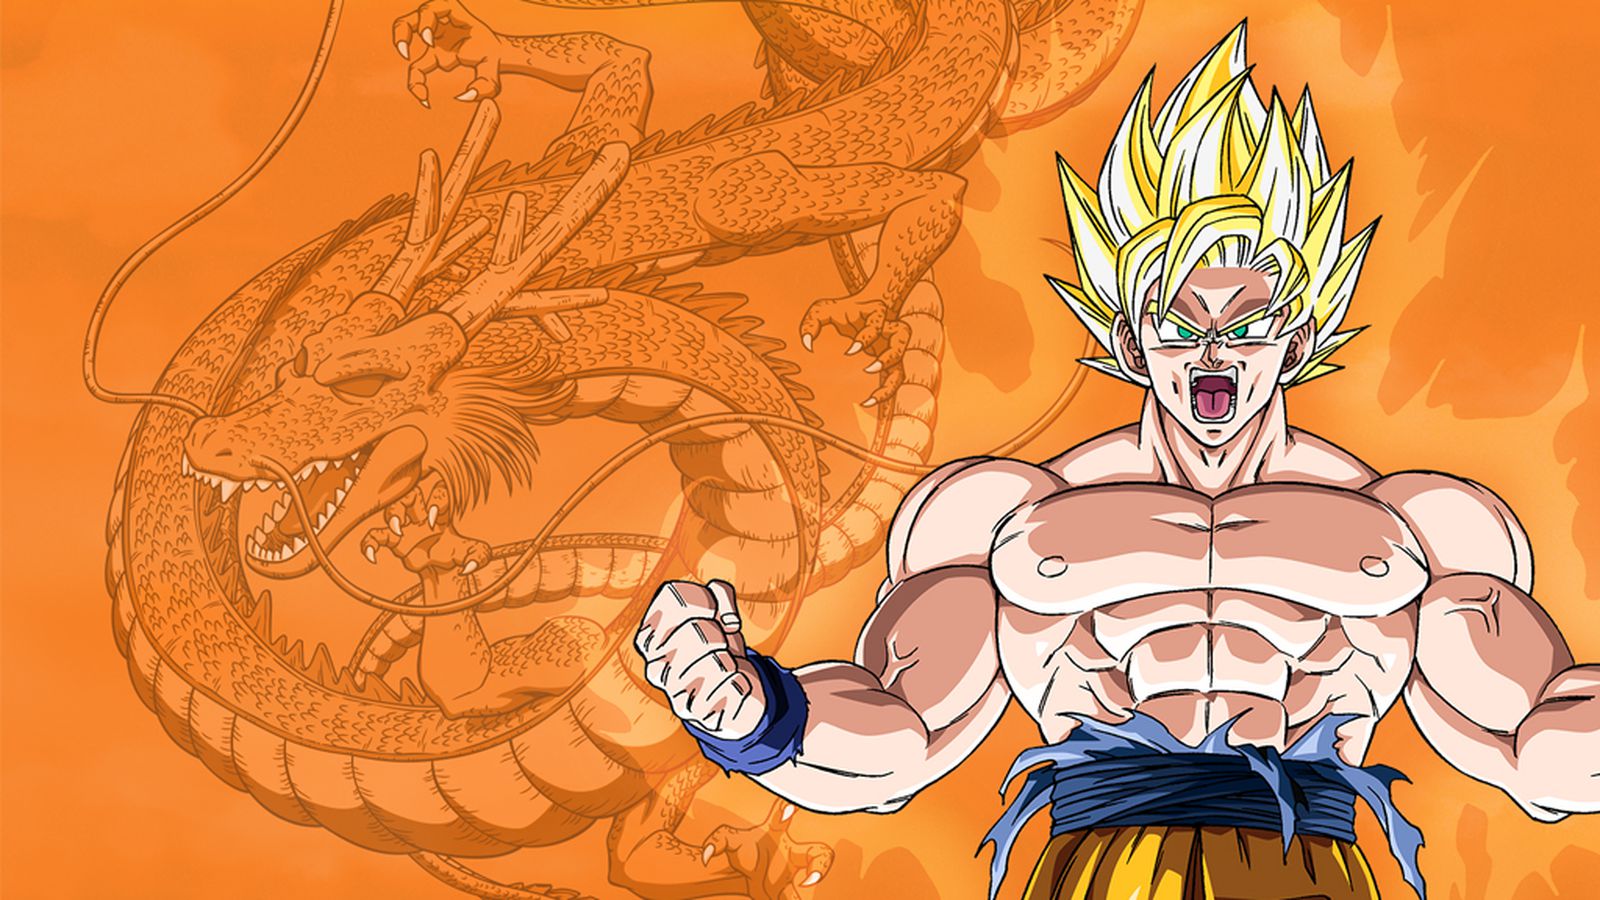 The first new Dragon Ball series in nearly 20 years will